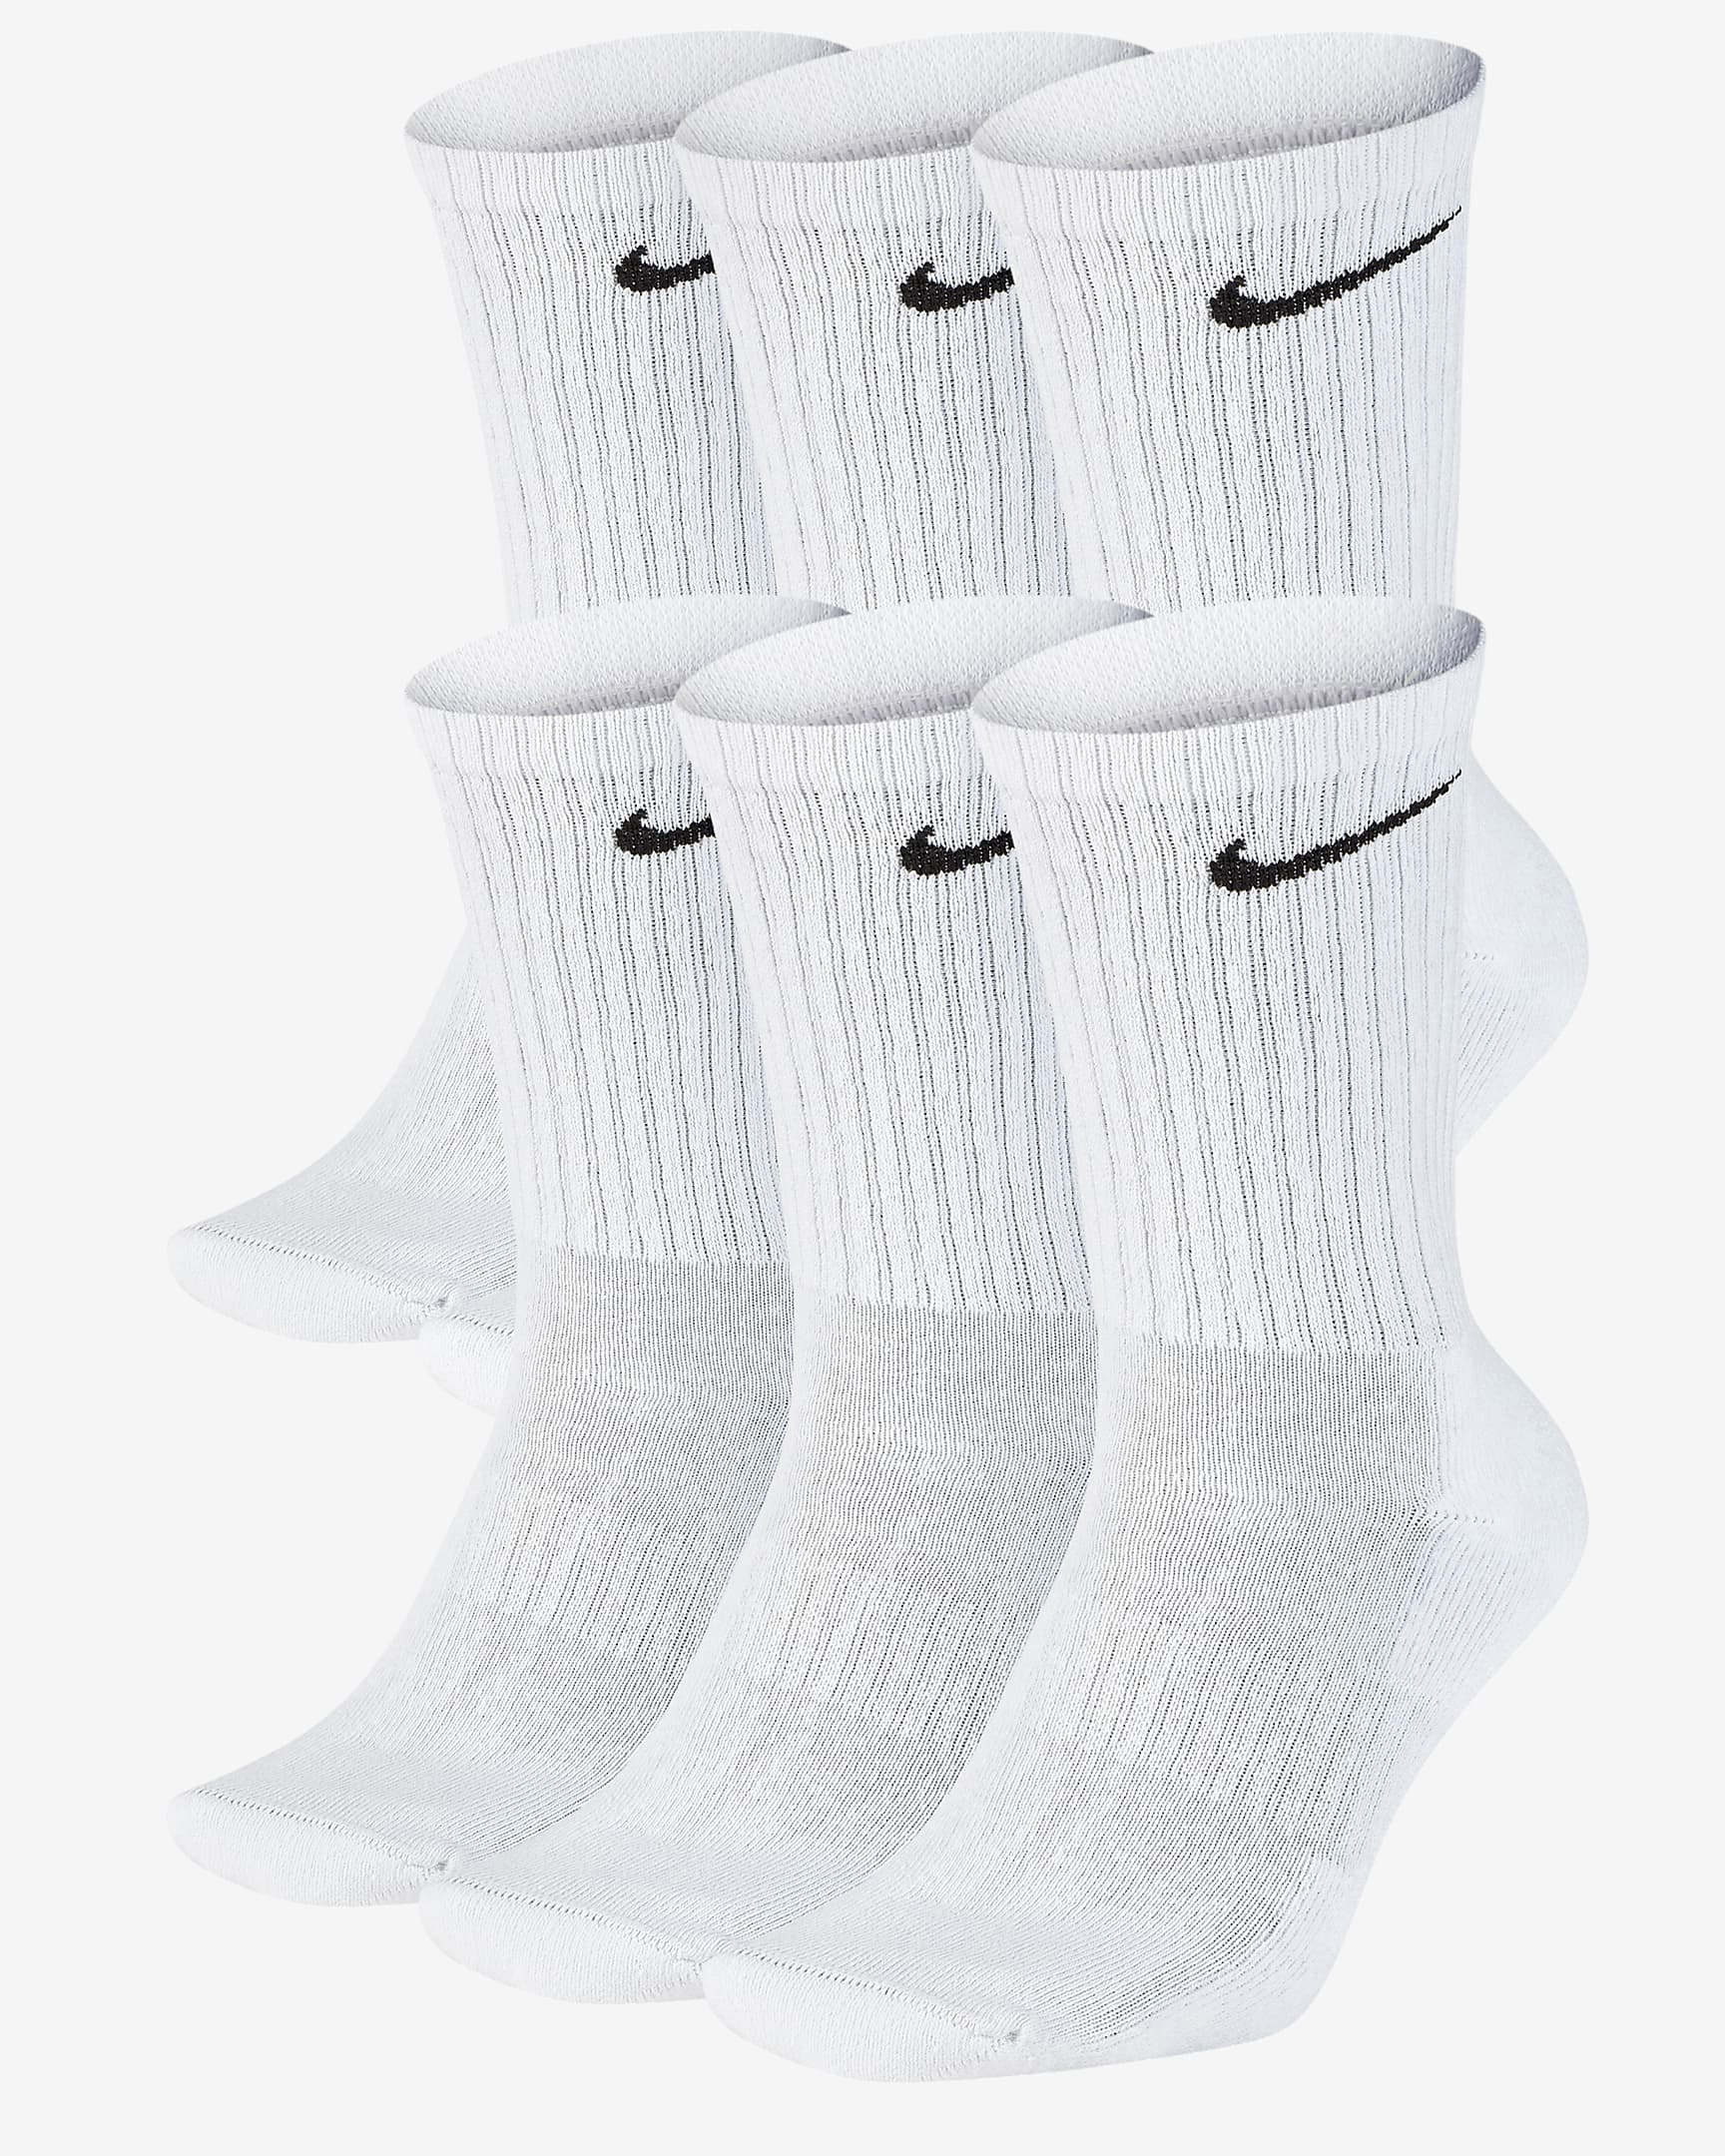 Reiziger ontslaan klauw Nike Mid-Calf Socks Are The Best Affordable Accessory